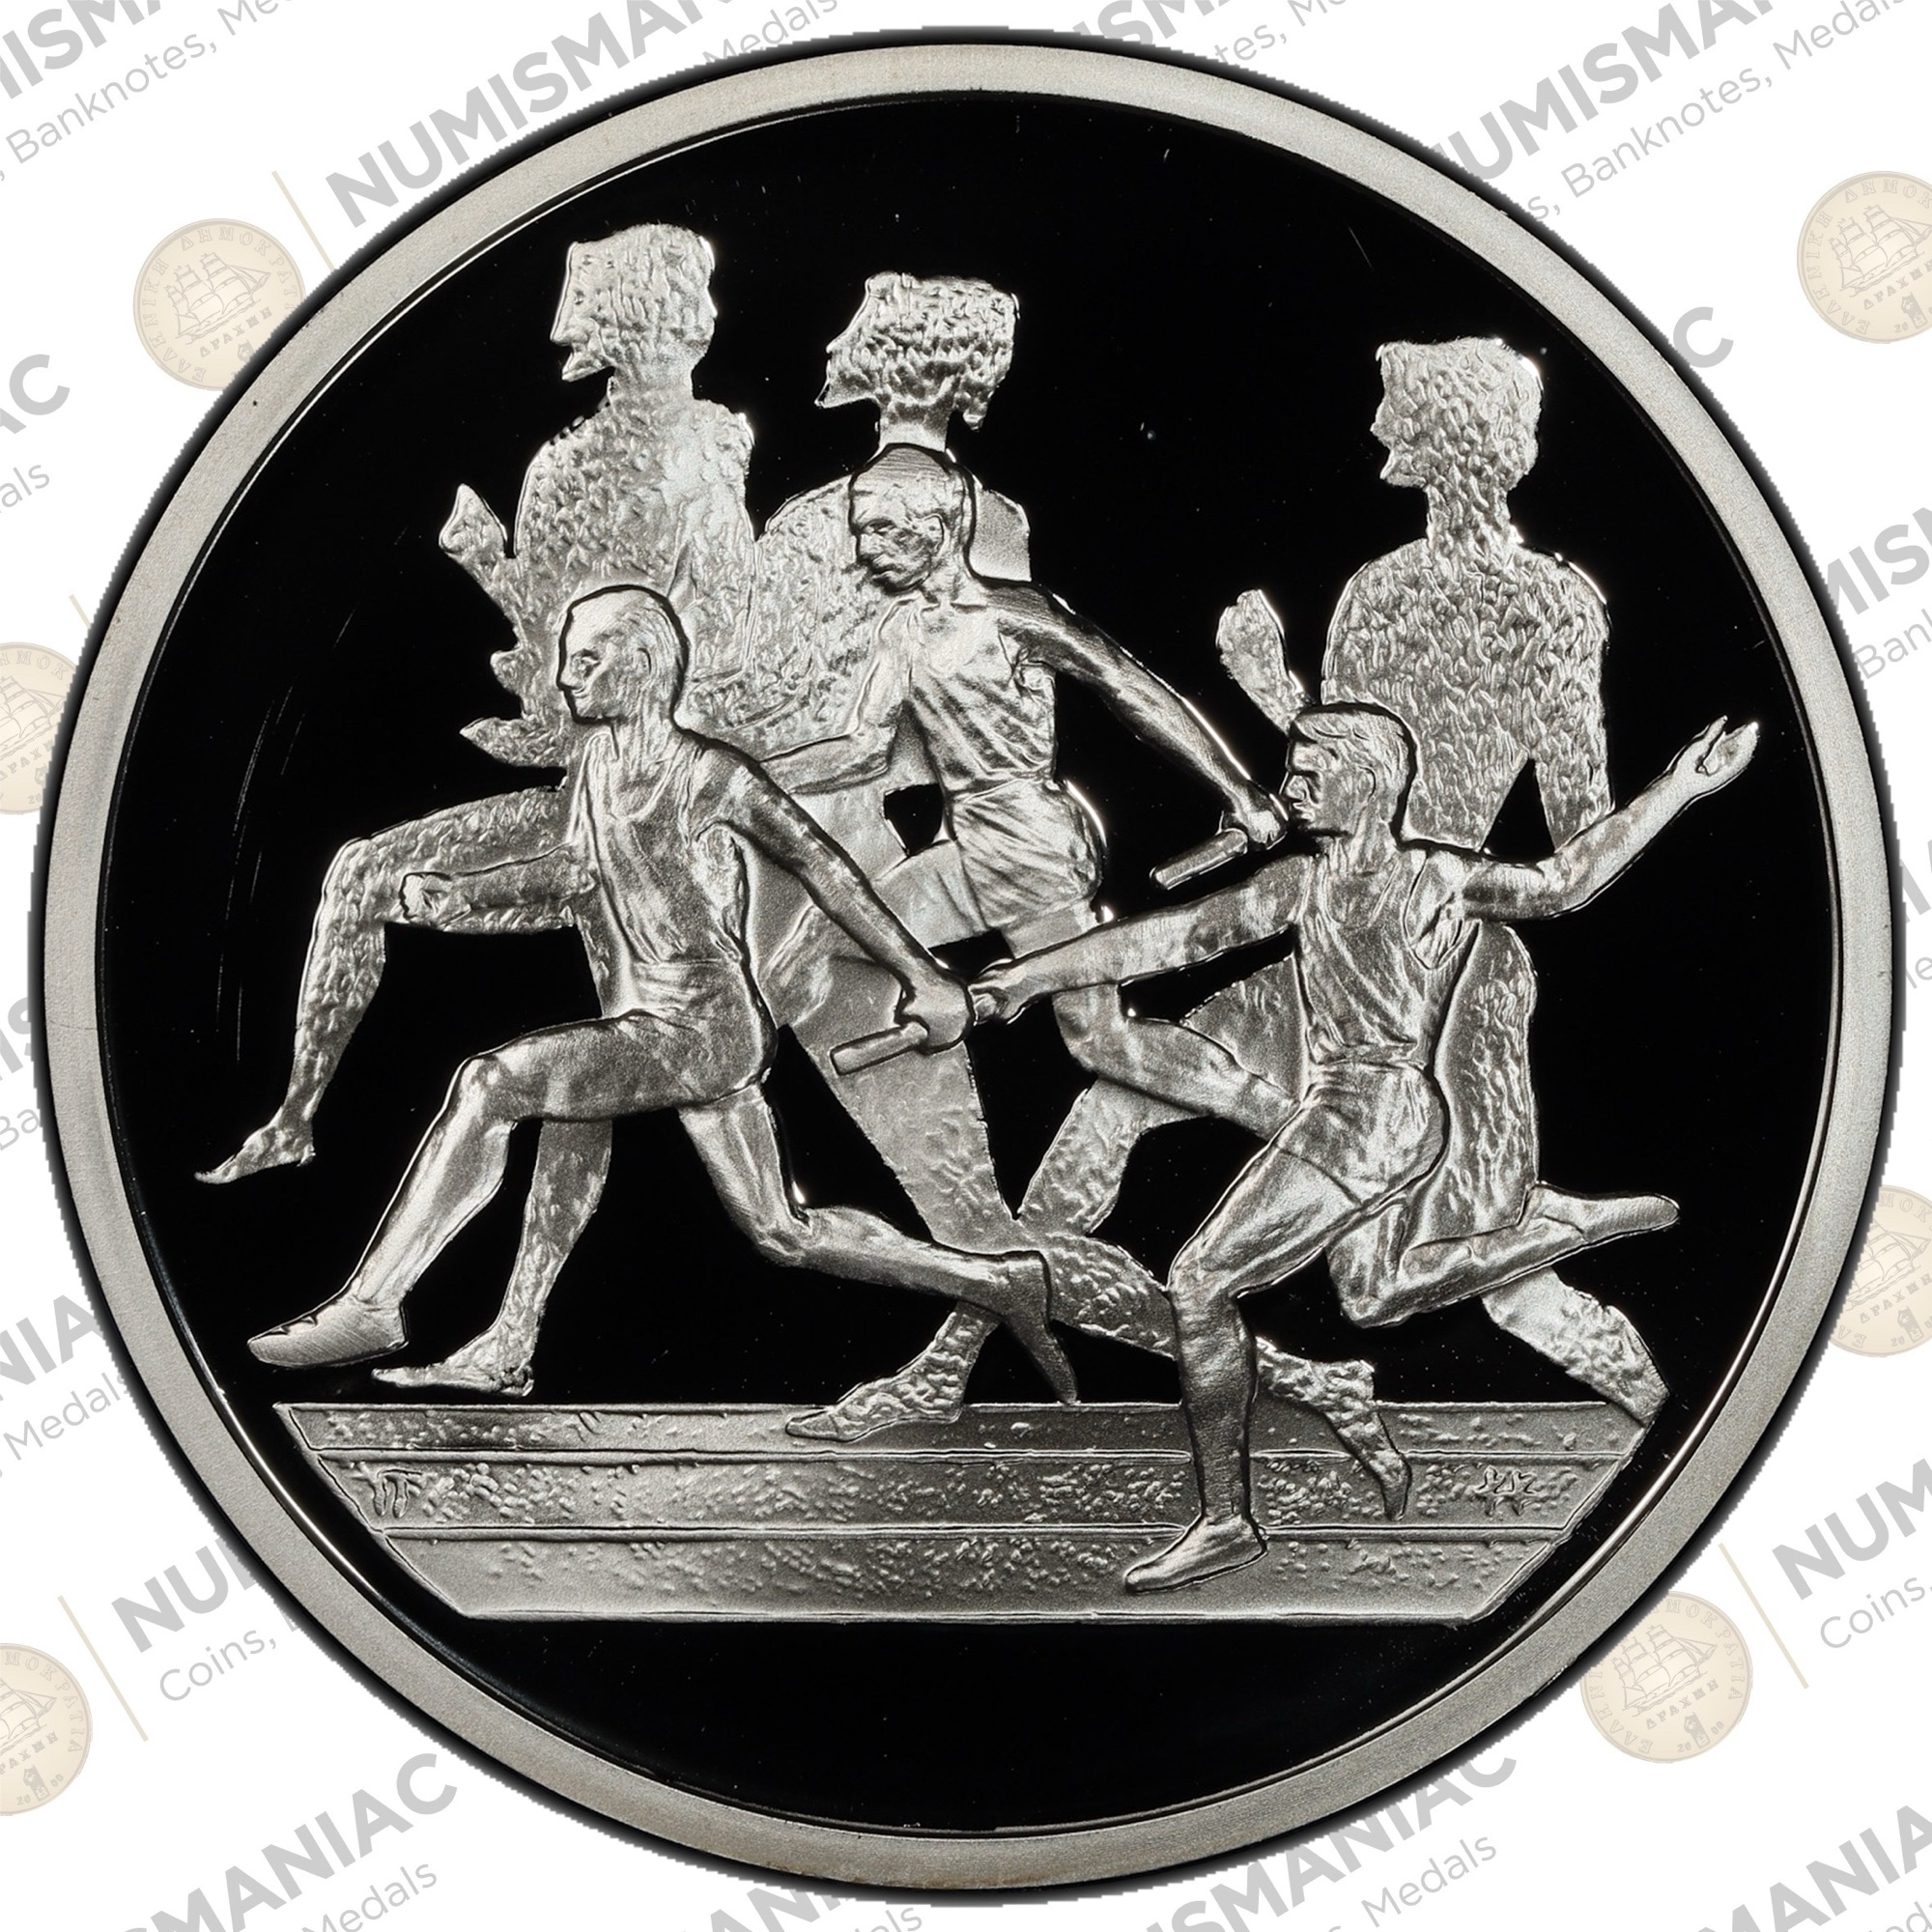 Greece 🇬🇷 10 Euro 2003 "Relay Race" 1oz Silver Bullion Proof Coin with capsule. A